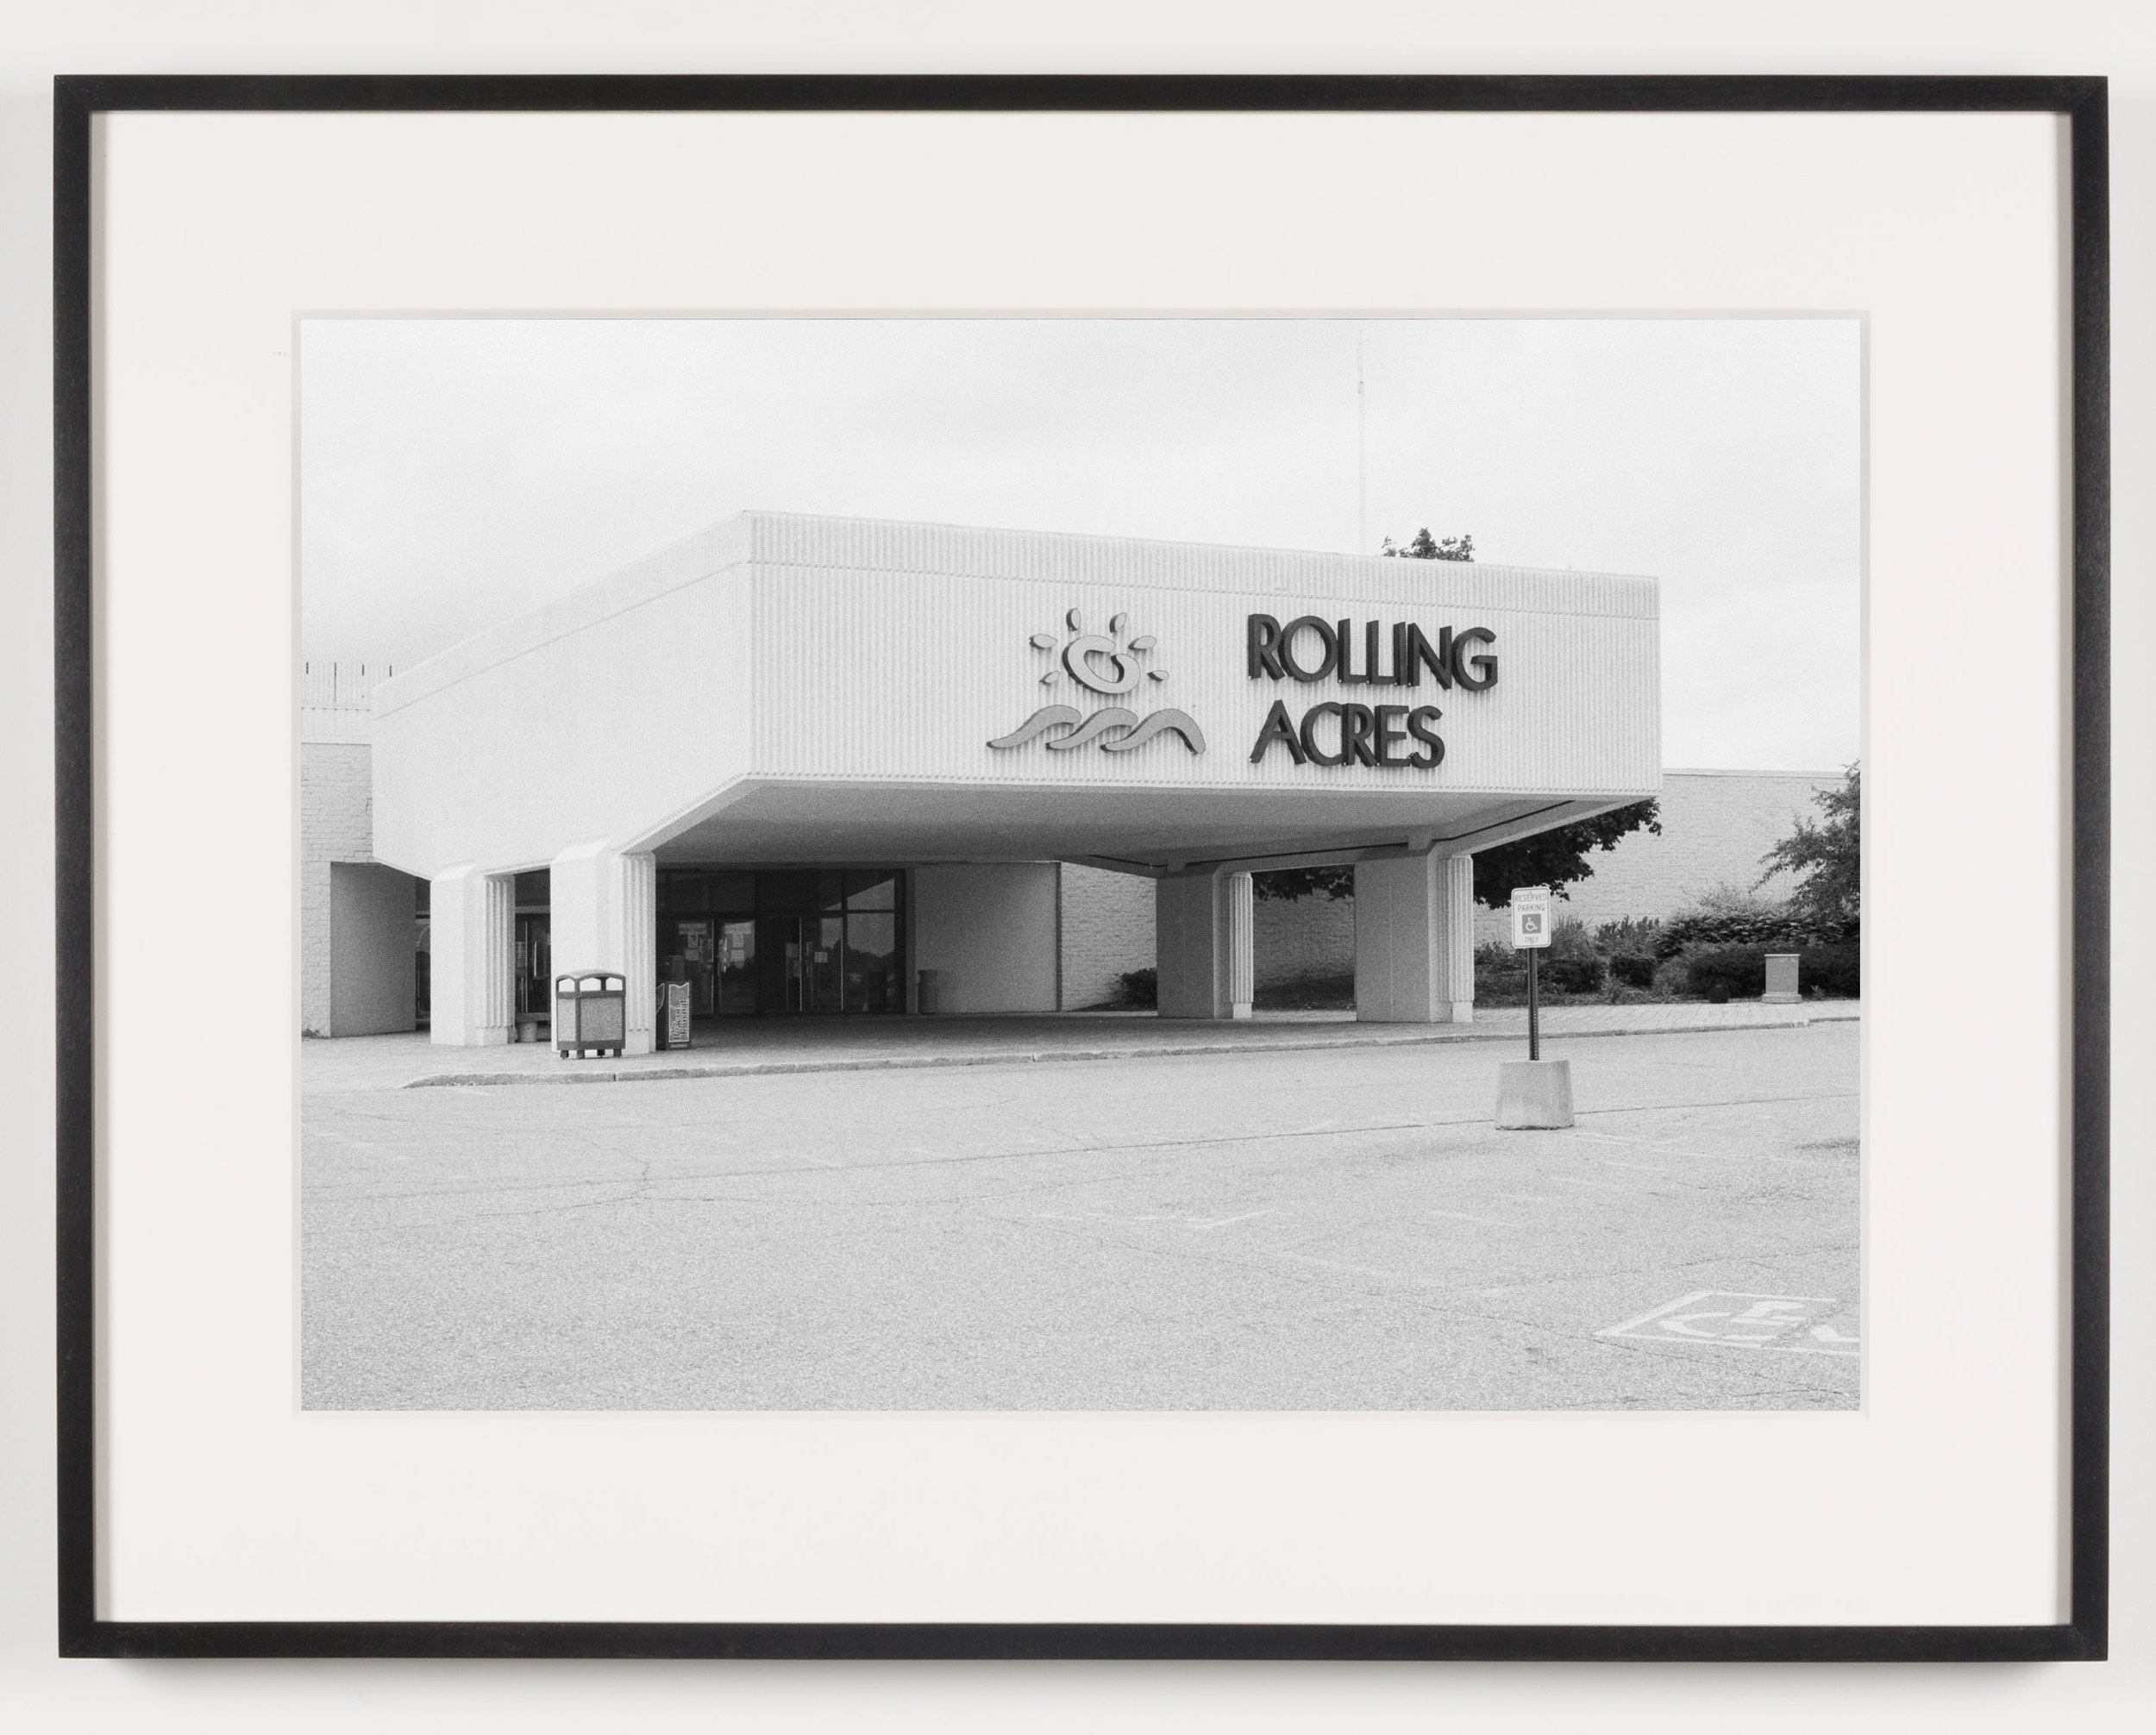   Rolling Acres Mall (View of Main Entrance) Akron, OH, Est. 1975    2011   Epson Ultrachrome K3 archival ink jet print on Hahnemühle Photo Rag paper  21 5/8 x 28 1/8 inches  Exhibition:   A Diagram of Forces, 2011  